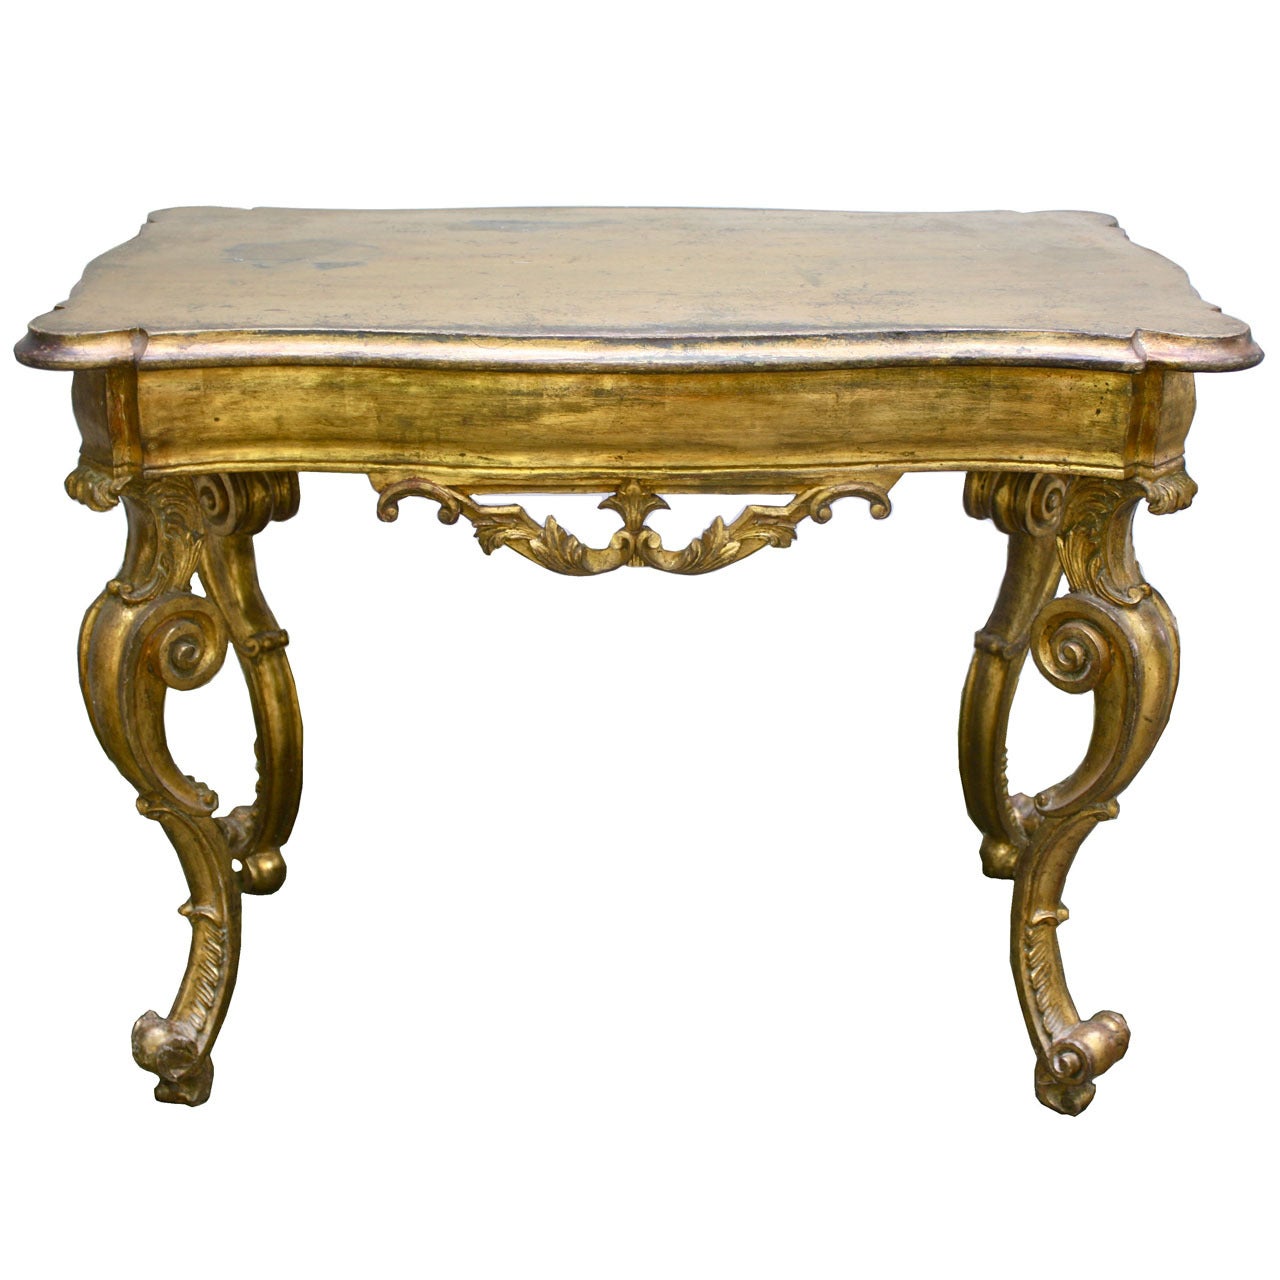 Florentine Giltwood Center or Console Table